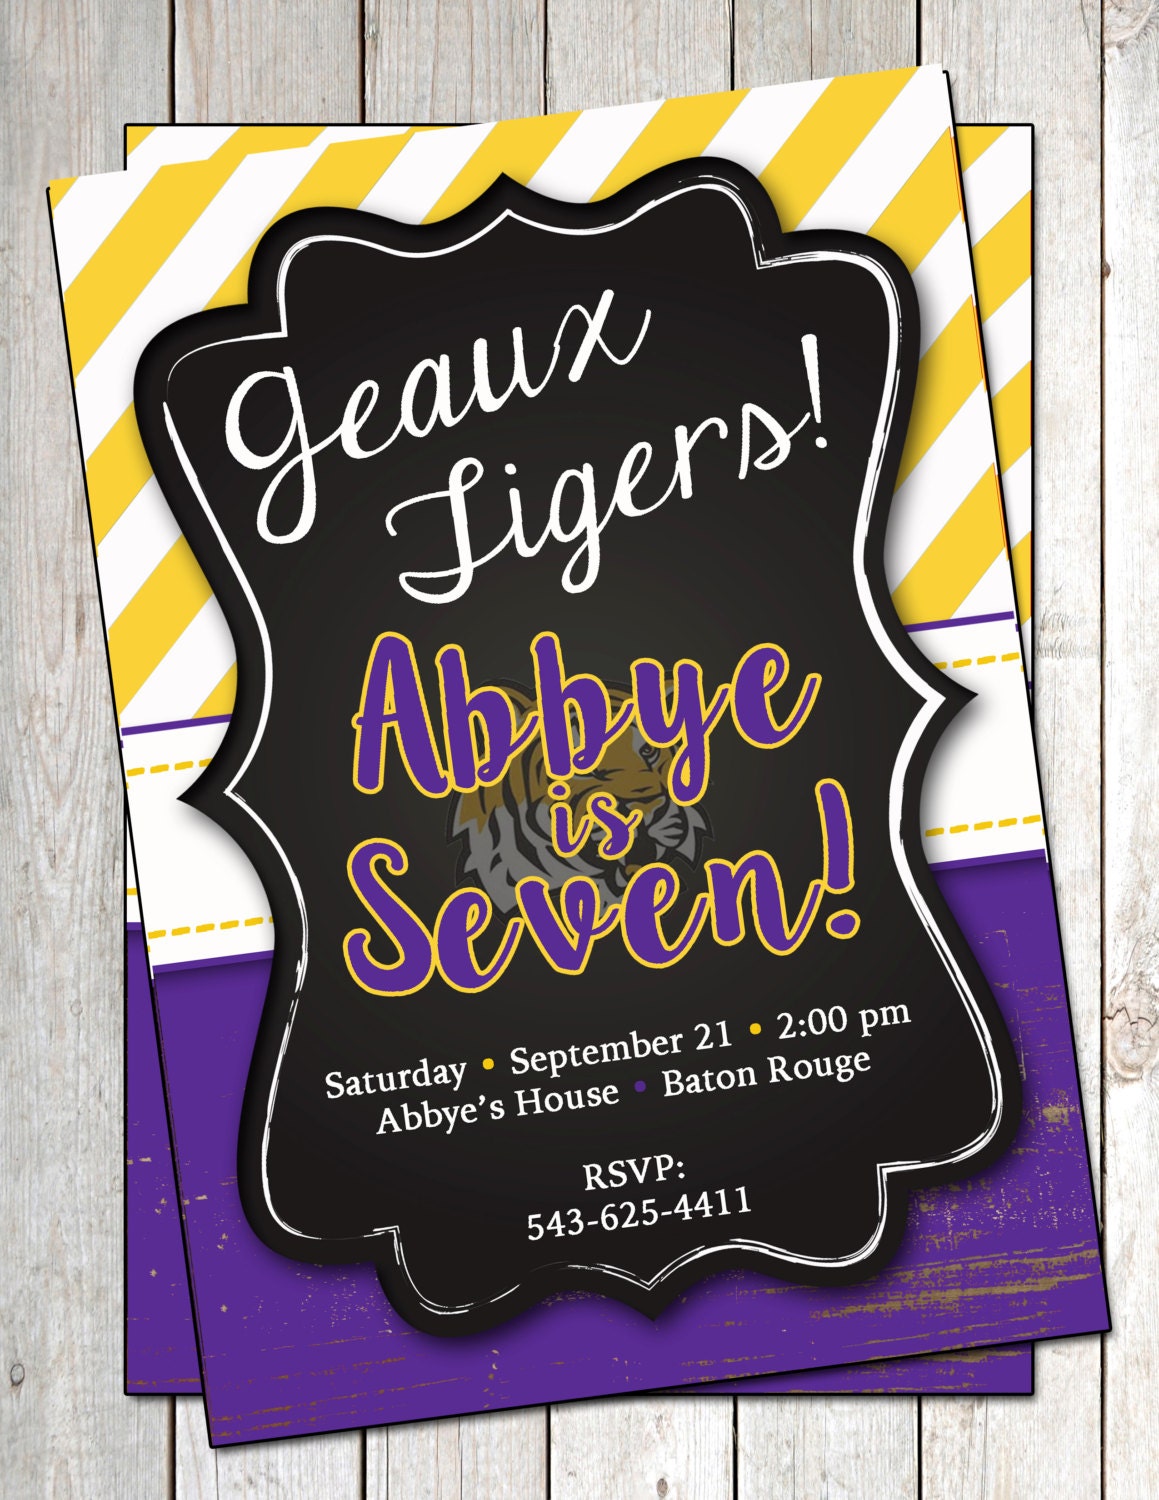 Louisiana State Tigers Bottle Labels – LSU – Sports Invites